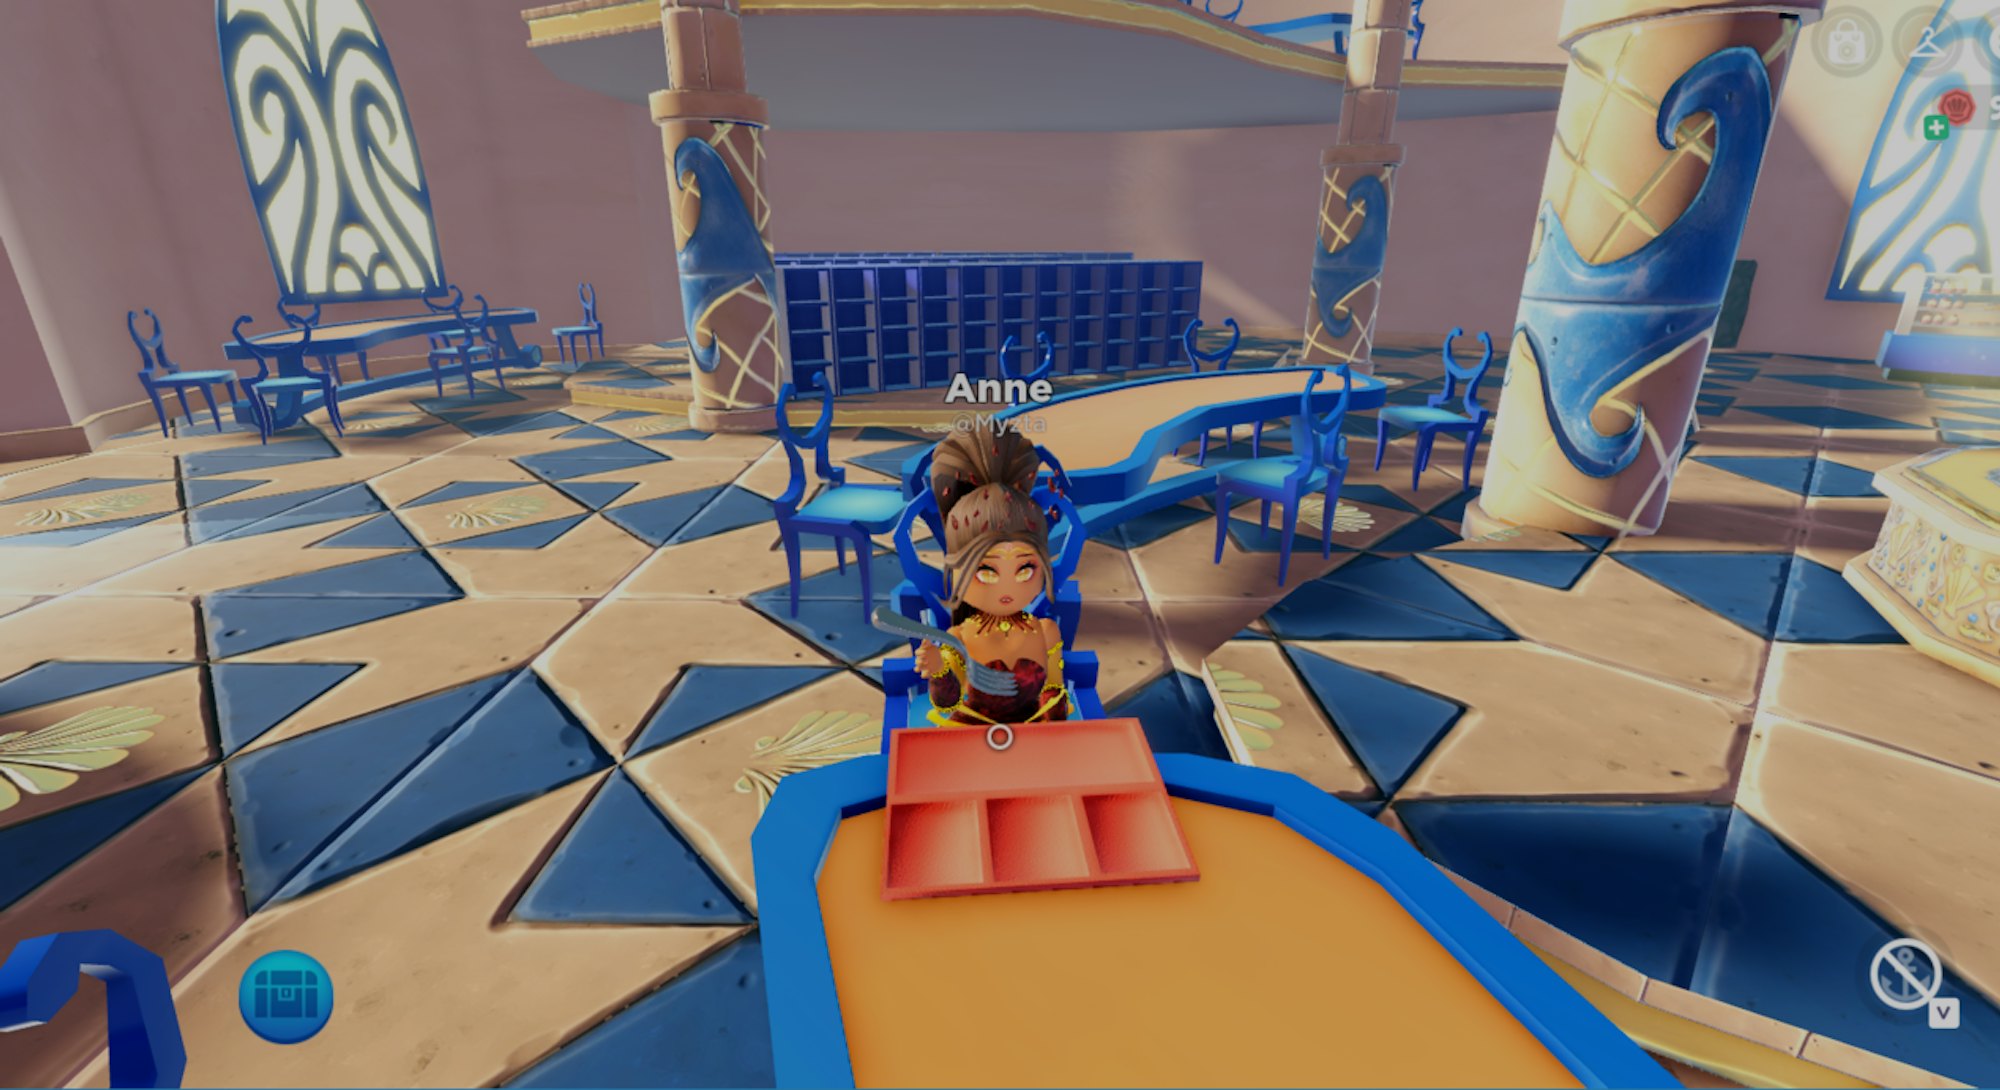 Image from virtual Roblox experience "Mermaid life." Blue and beige dining room setting.